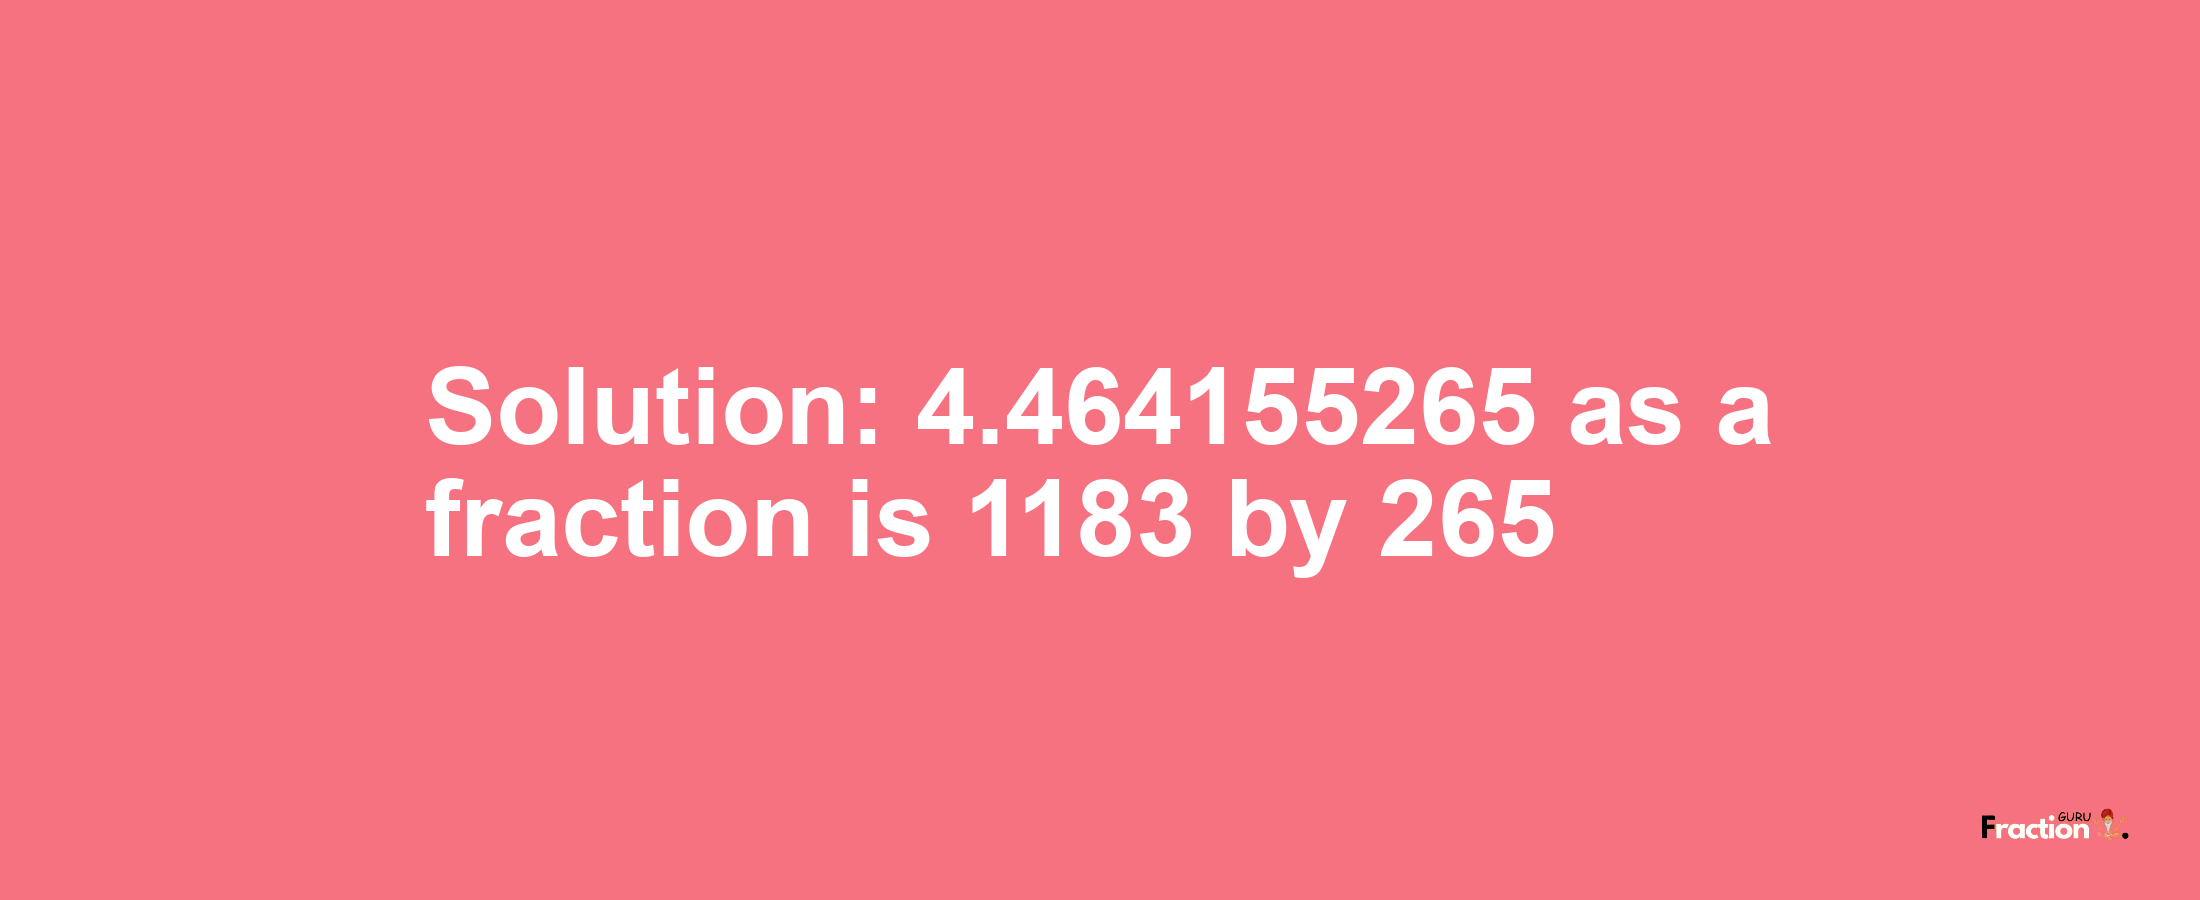 Solution:4.464155265 as a fraction is 1183/265